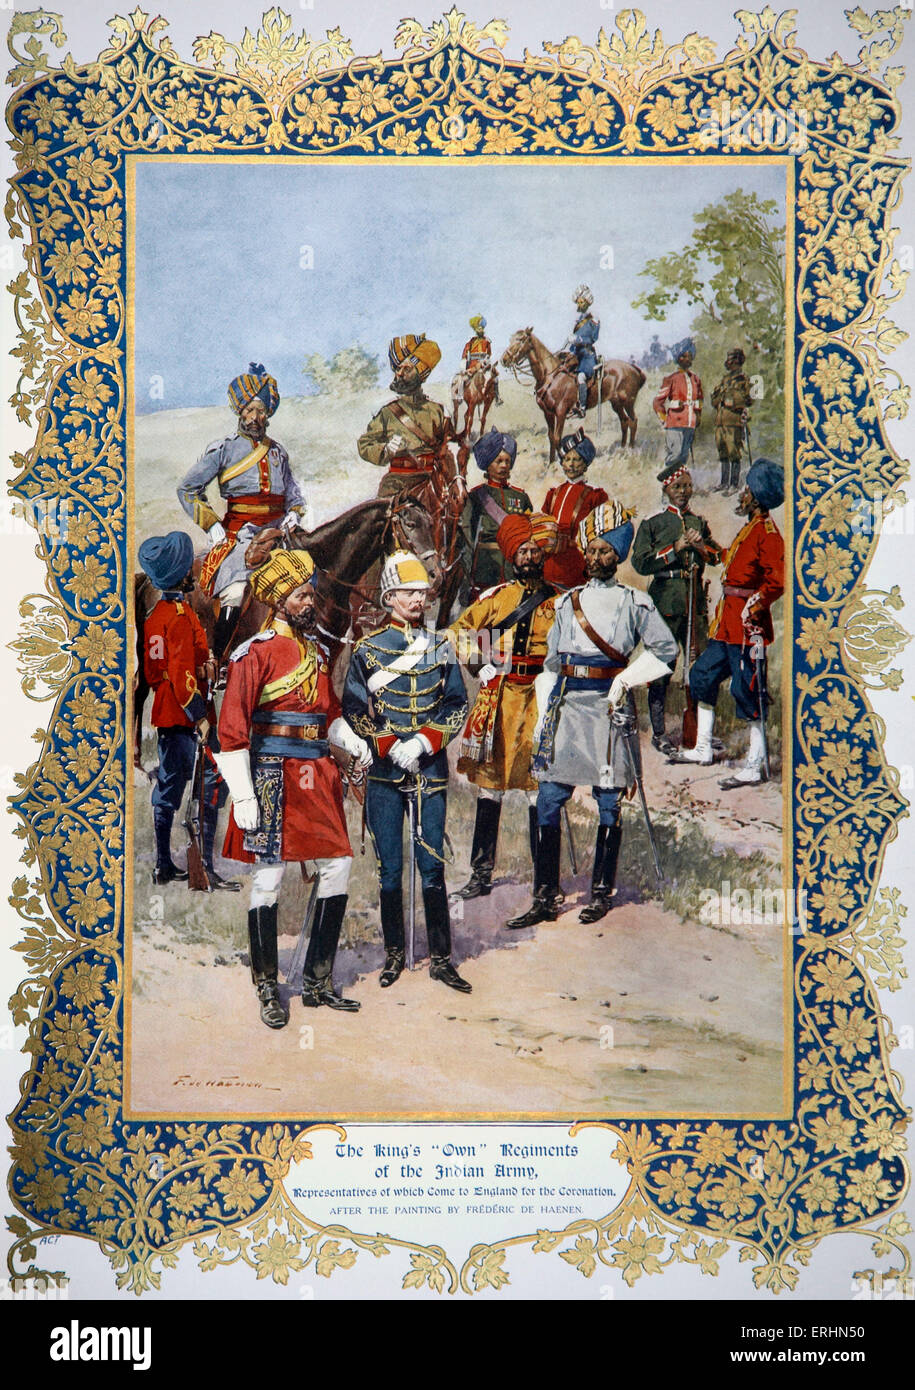 ‘The King’s ‘own’ regiments in the Indian army, representatives of which come to England for the coronation.  Painting by Stock Photo